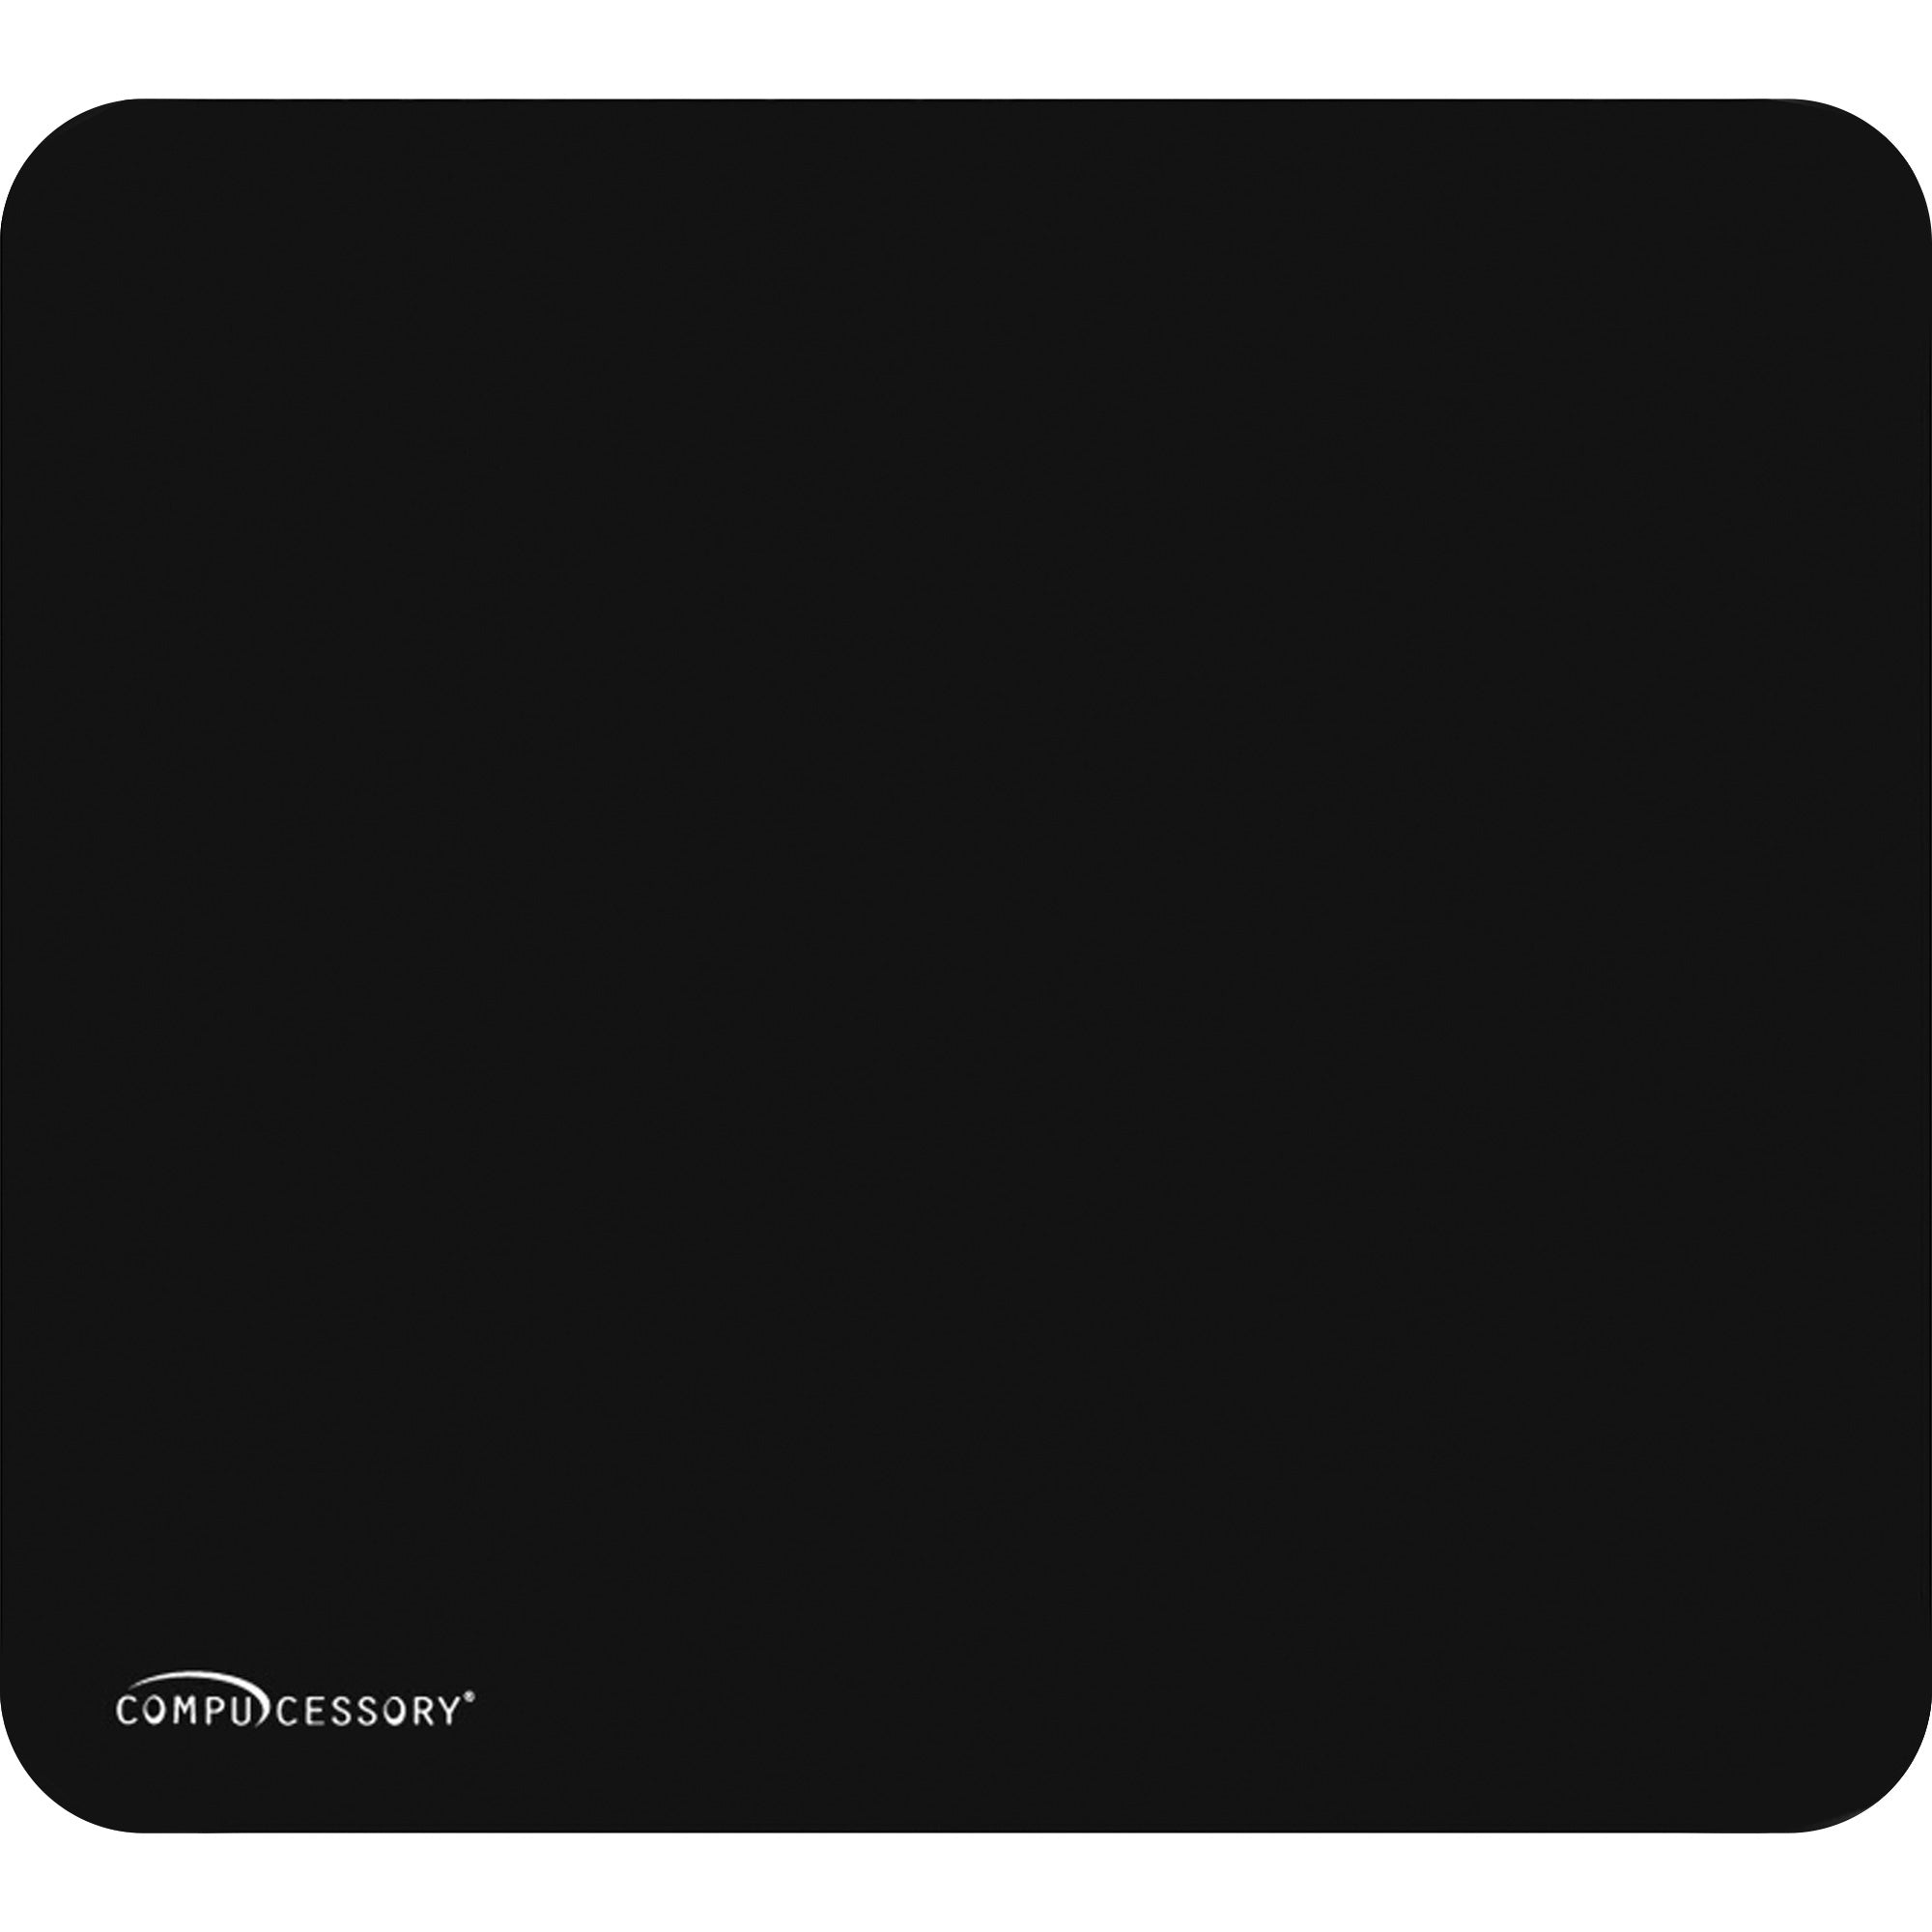 compucessory-smooth-cloth-nonskid-mouse-pads-950-x-850-dimension-black-rubber-cloth-1-pack_ccs23617 - 1